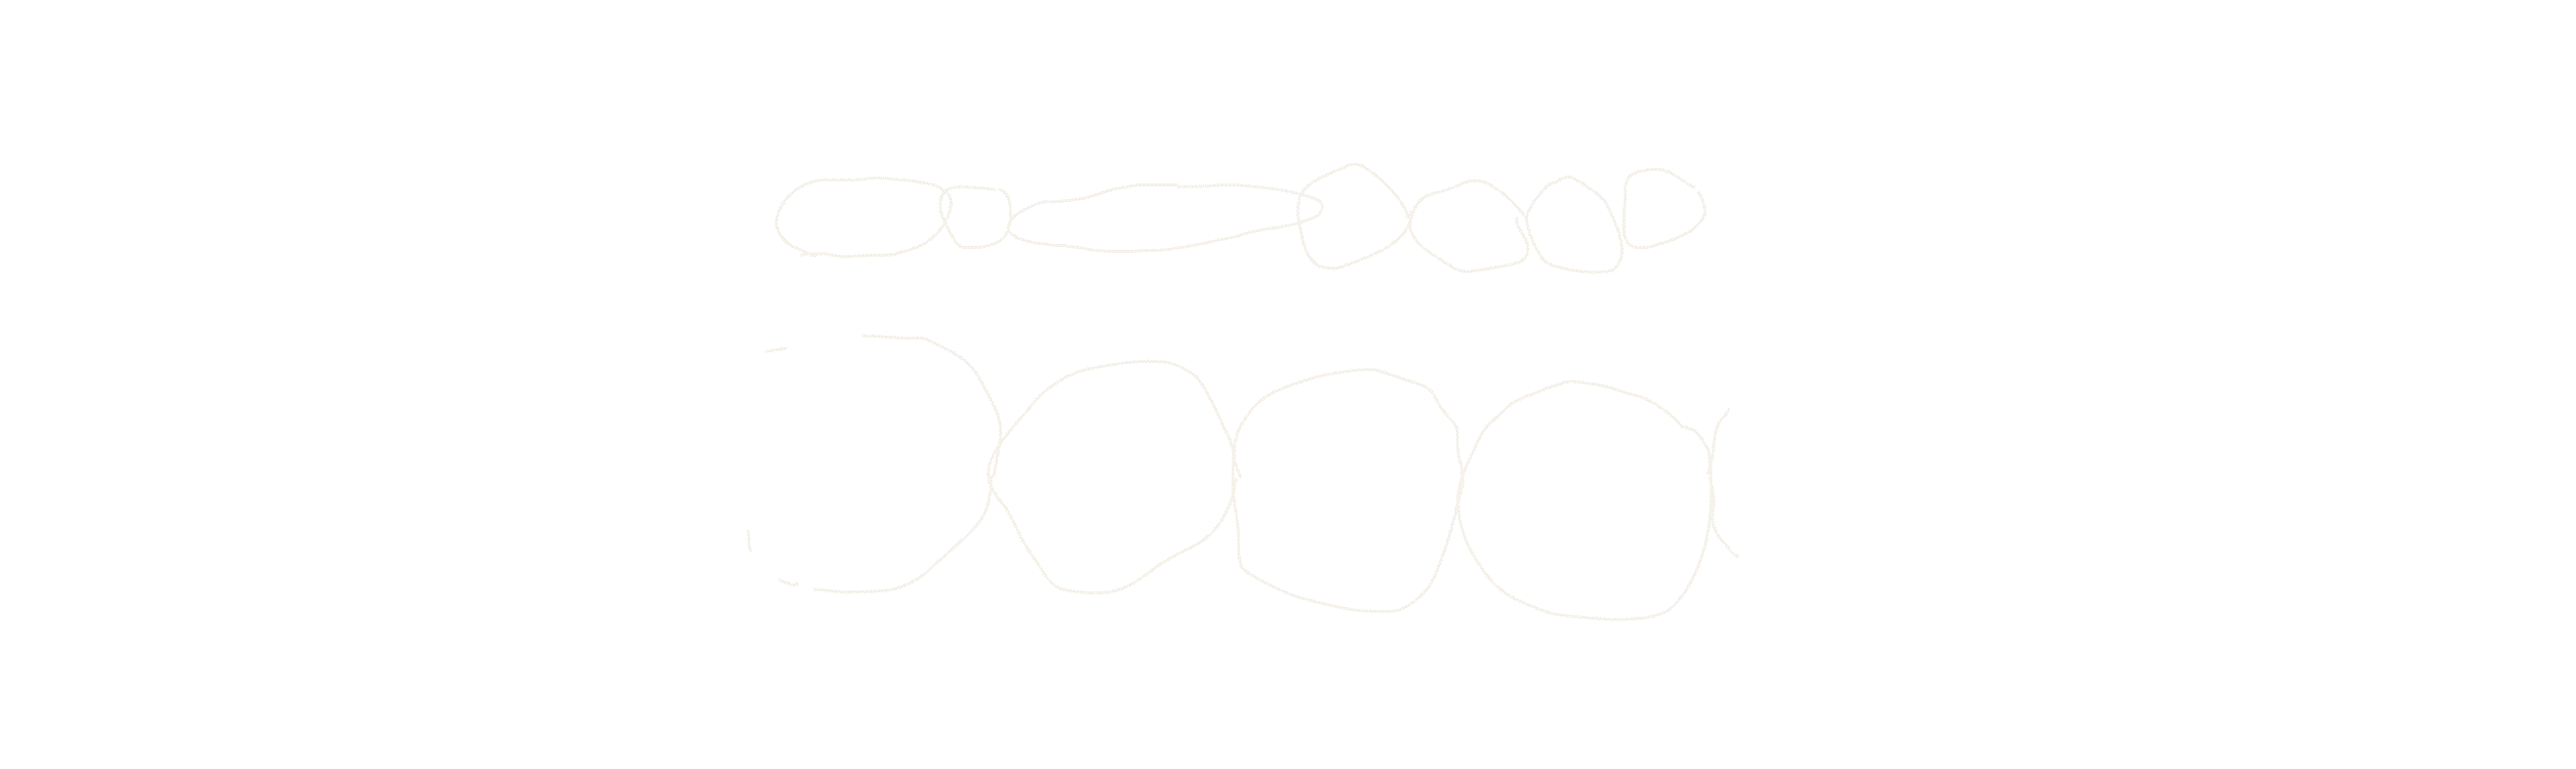 Two drawings: the first is of several adjacent circles and ovals, each of different length but with the same height. The second drawing, below, is of several medium-sized circles, with the outer ones being incomplete.